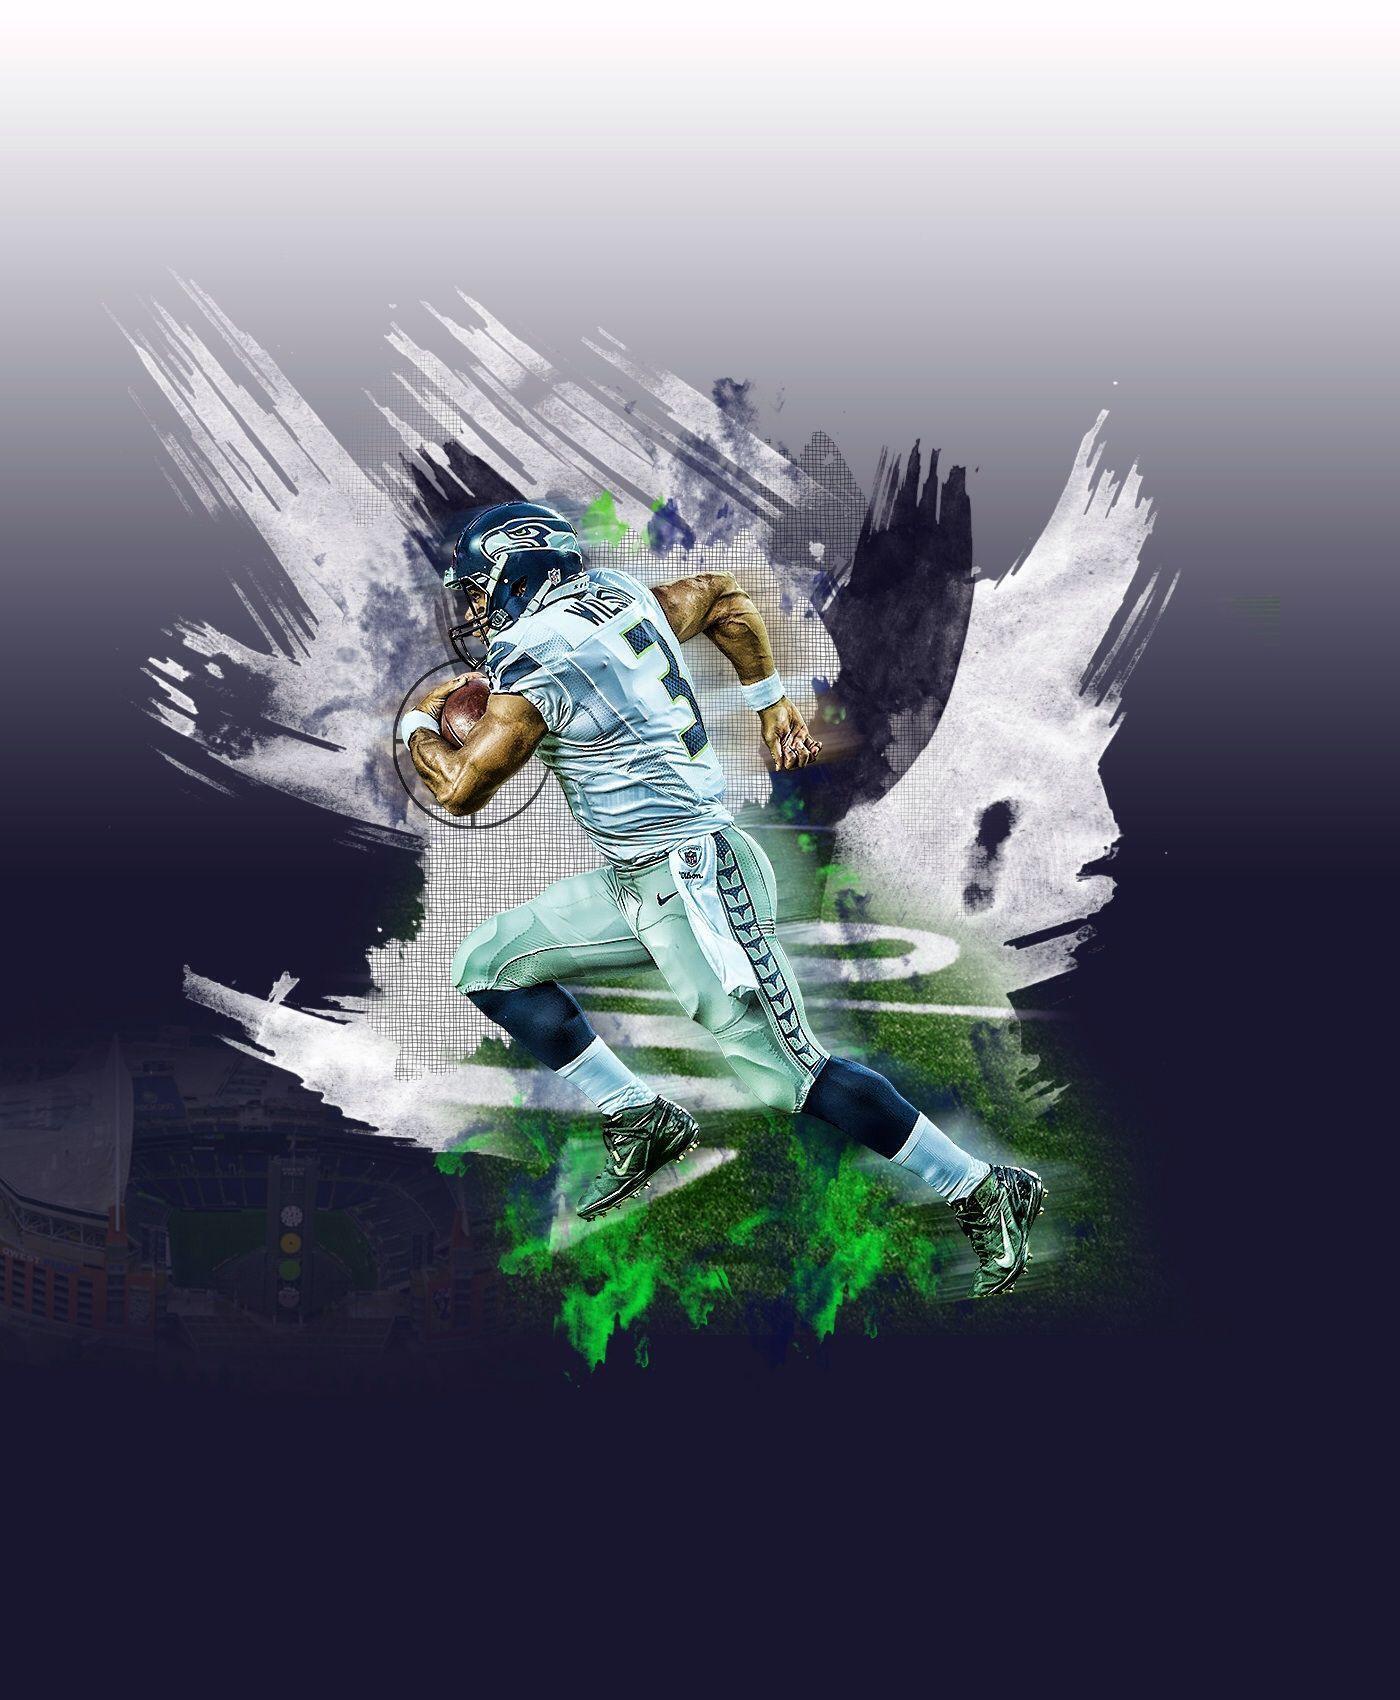 JSGraphixs on Instagram Russell Wilson   Leave some suggestions and  feedback in the com  Seattle seahawks football Nfl football wallpaper  Seahawks football